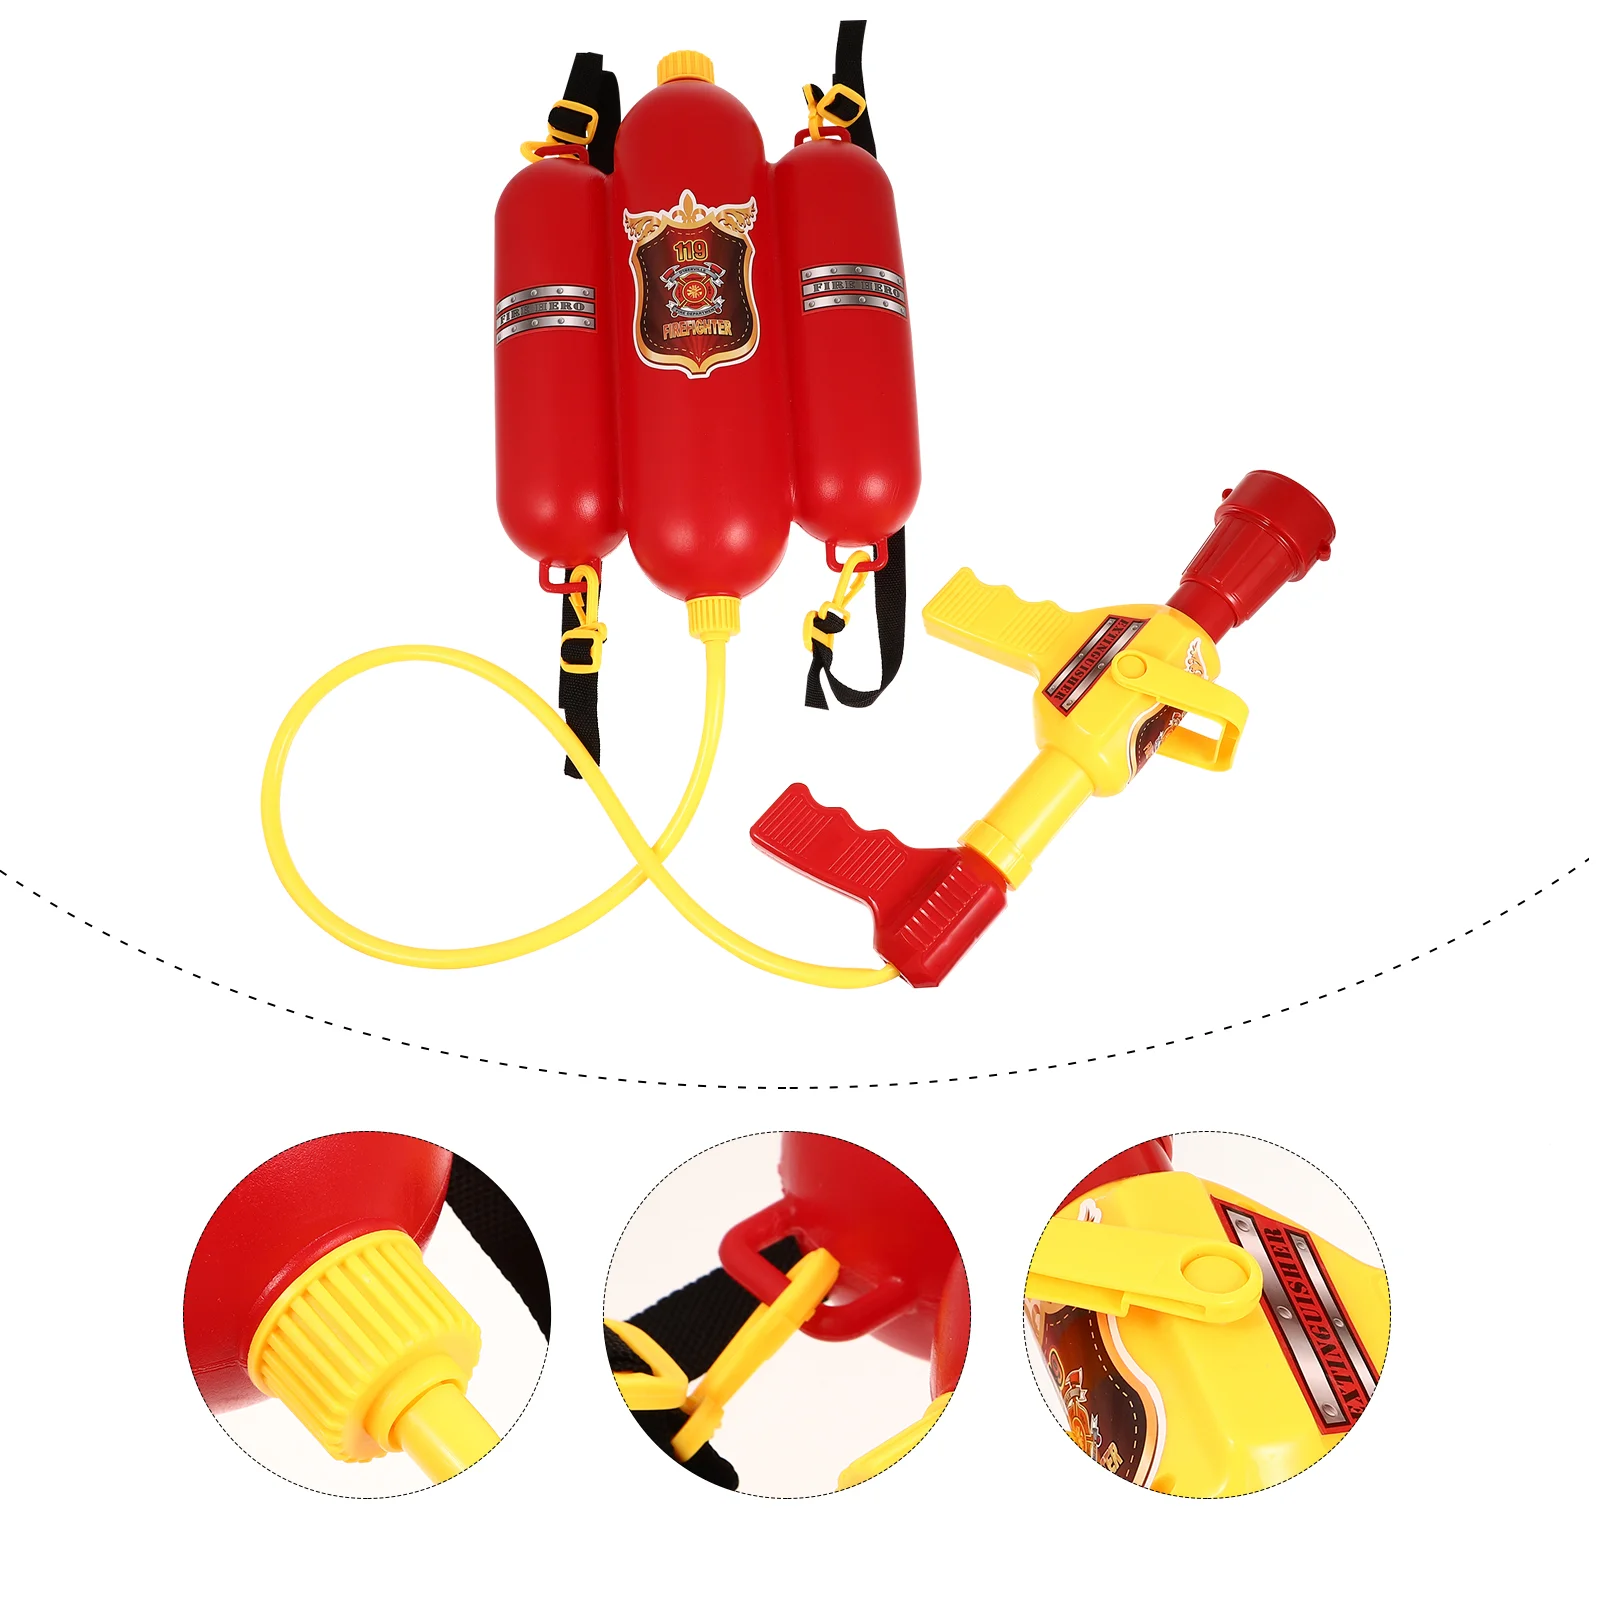 

Firefighter Fire Extinguisher Water Gun Backpack Toy Water Gun Children Outdoor Toys Children Firefighter Role Playing Pool Toys